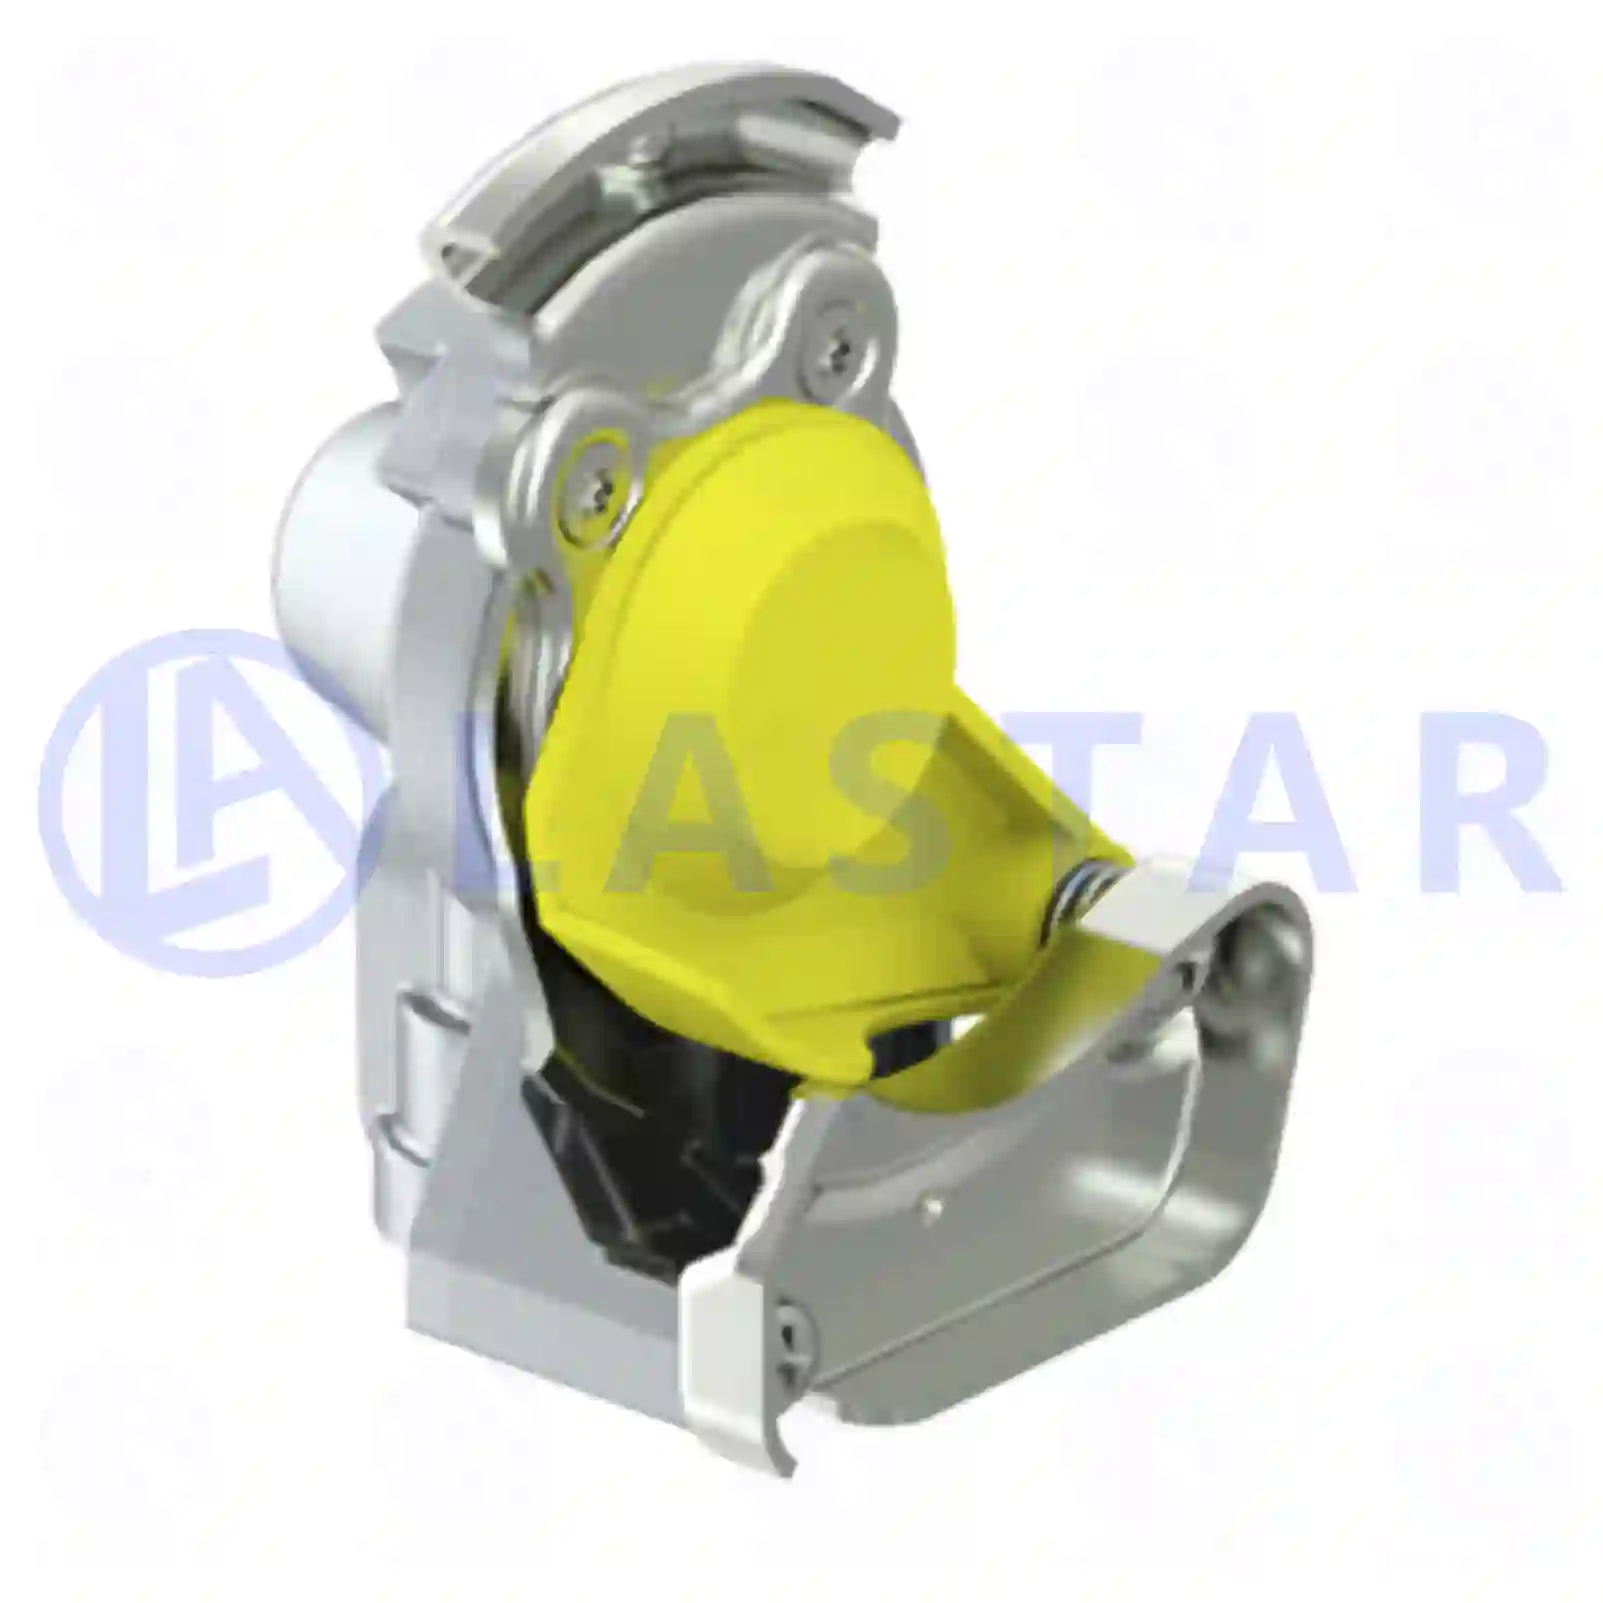 Compressed Air Palm coupling, automatic shutter, yellow lid, la no: 77724598 ,  oem no:0632566, 1519232, 632566, AFA4271019, CF3517862, CF3519116, H03196101, 154434, 02515210, 02515442, 02516900, 02521367, 04323302, 04715224, 04715225, 04841036, 04983302, 2515210, 2515442, 2516900, 2521367, 42070650, 4323302, 4715225, 4841036, 4983302, 5000607008, 5010260538, 76625, 500945411, 5009454110, 505806558, 945411, 502915601, 09522002220, 32512206004, 32512206005, 32512206006, 32512206007, 81512206027, 81512206032, 81512206046, 81512206069, 81512206079, 81512206093, 81512206096, 81512206098, 81512206103, 81512206109, 81512206112, 82512206027, 85500013215, 0004294030, 0004295030, 0004296230, 0004298130, 0004298730, 0004299830, 0004295630, 4522002220, 112233200, 462006, 462011, AFA427119, 5000438153, 5000442714, 5000607008, 5000877206, 5021170413, 5430000850, 7700051792, 318159, 051403, 8285281000, 8285385000, 82853920000, 1567994, 1584599, 20467885, 3198440, 6888511, 8157984, 2V5611337G, ZG50551-0008 Lastar Spare Part | Truck Spare Parts, Auotomotive Spare Parts